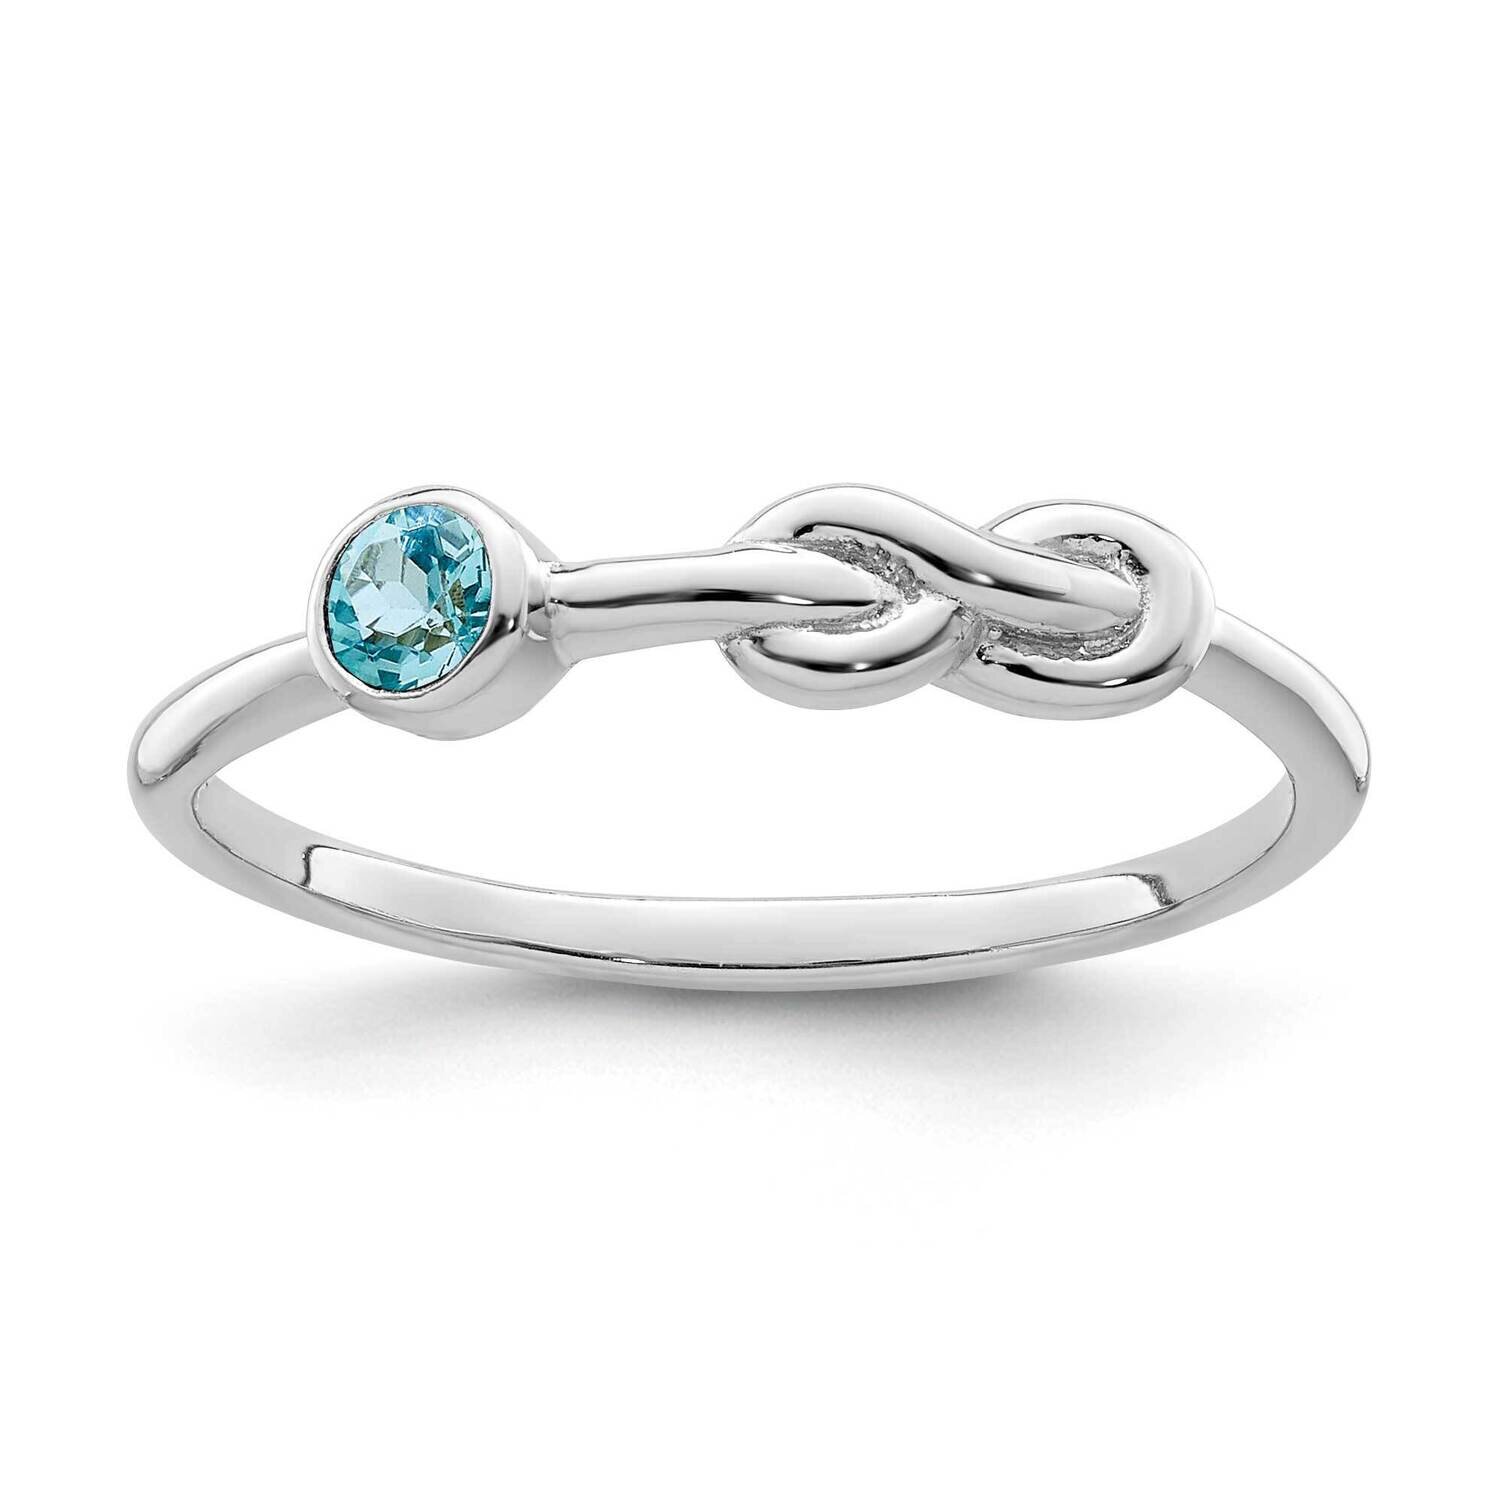 Polished Infinity Ls Blue Topaz Ring Sterling Silver Rhodium-plated QBR34DEC-7